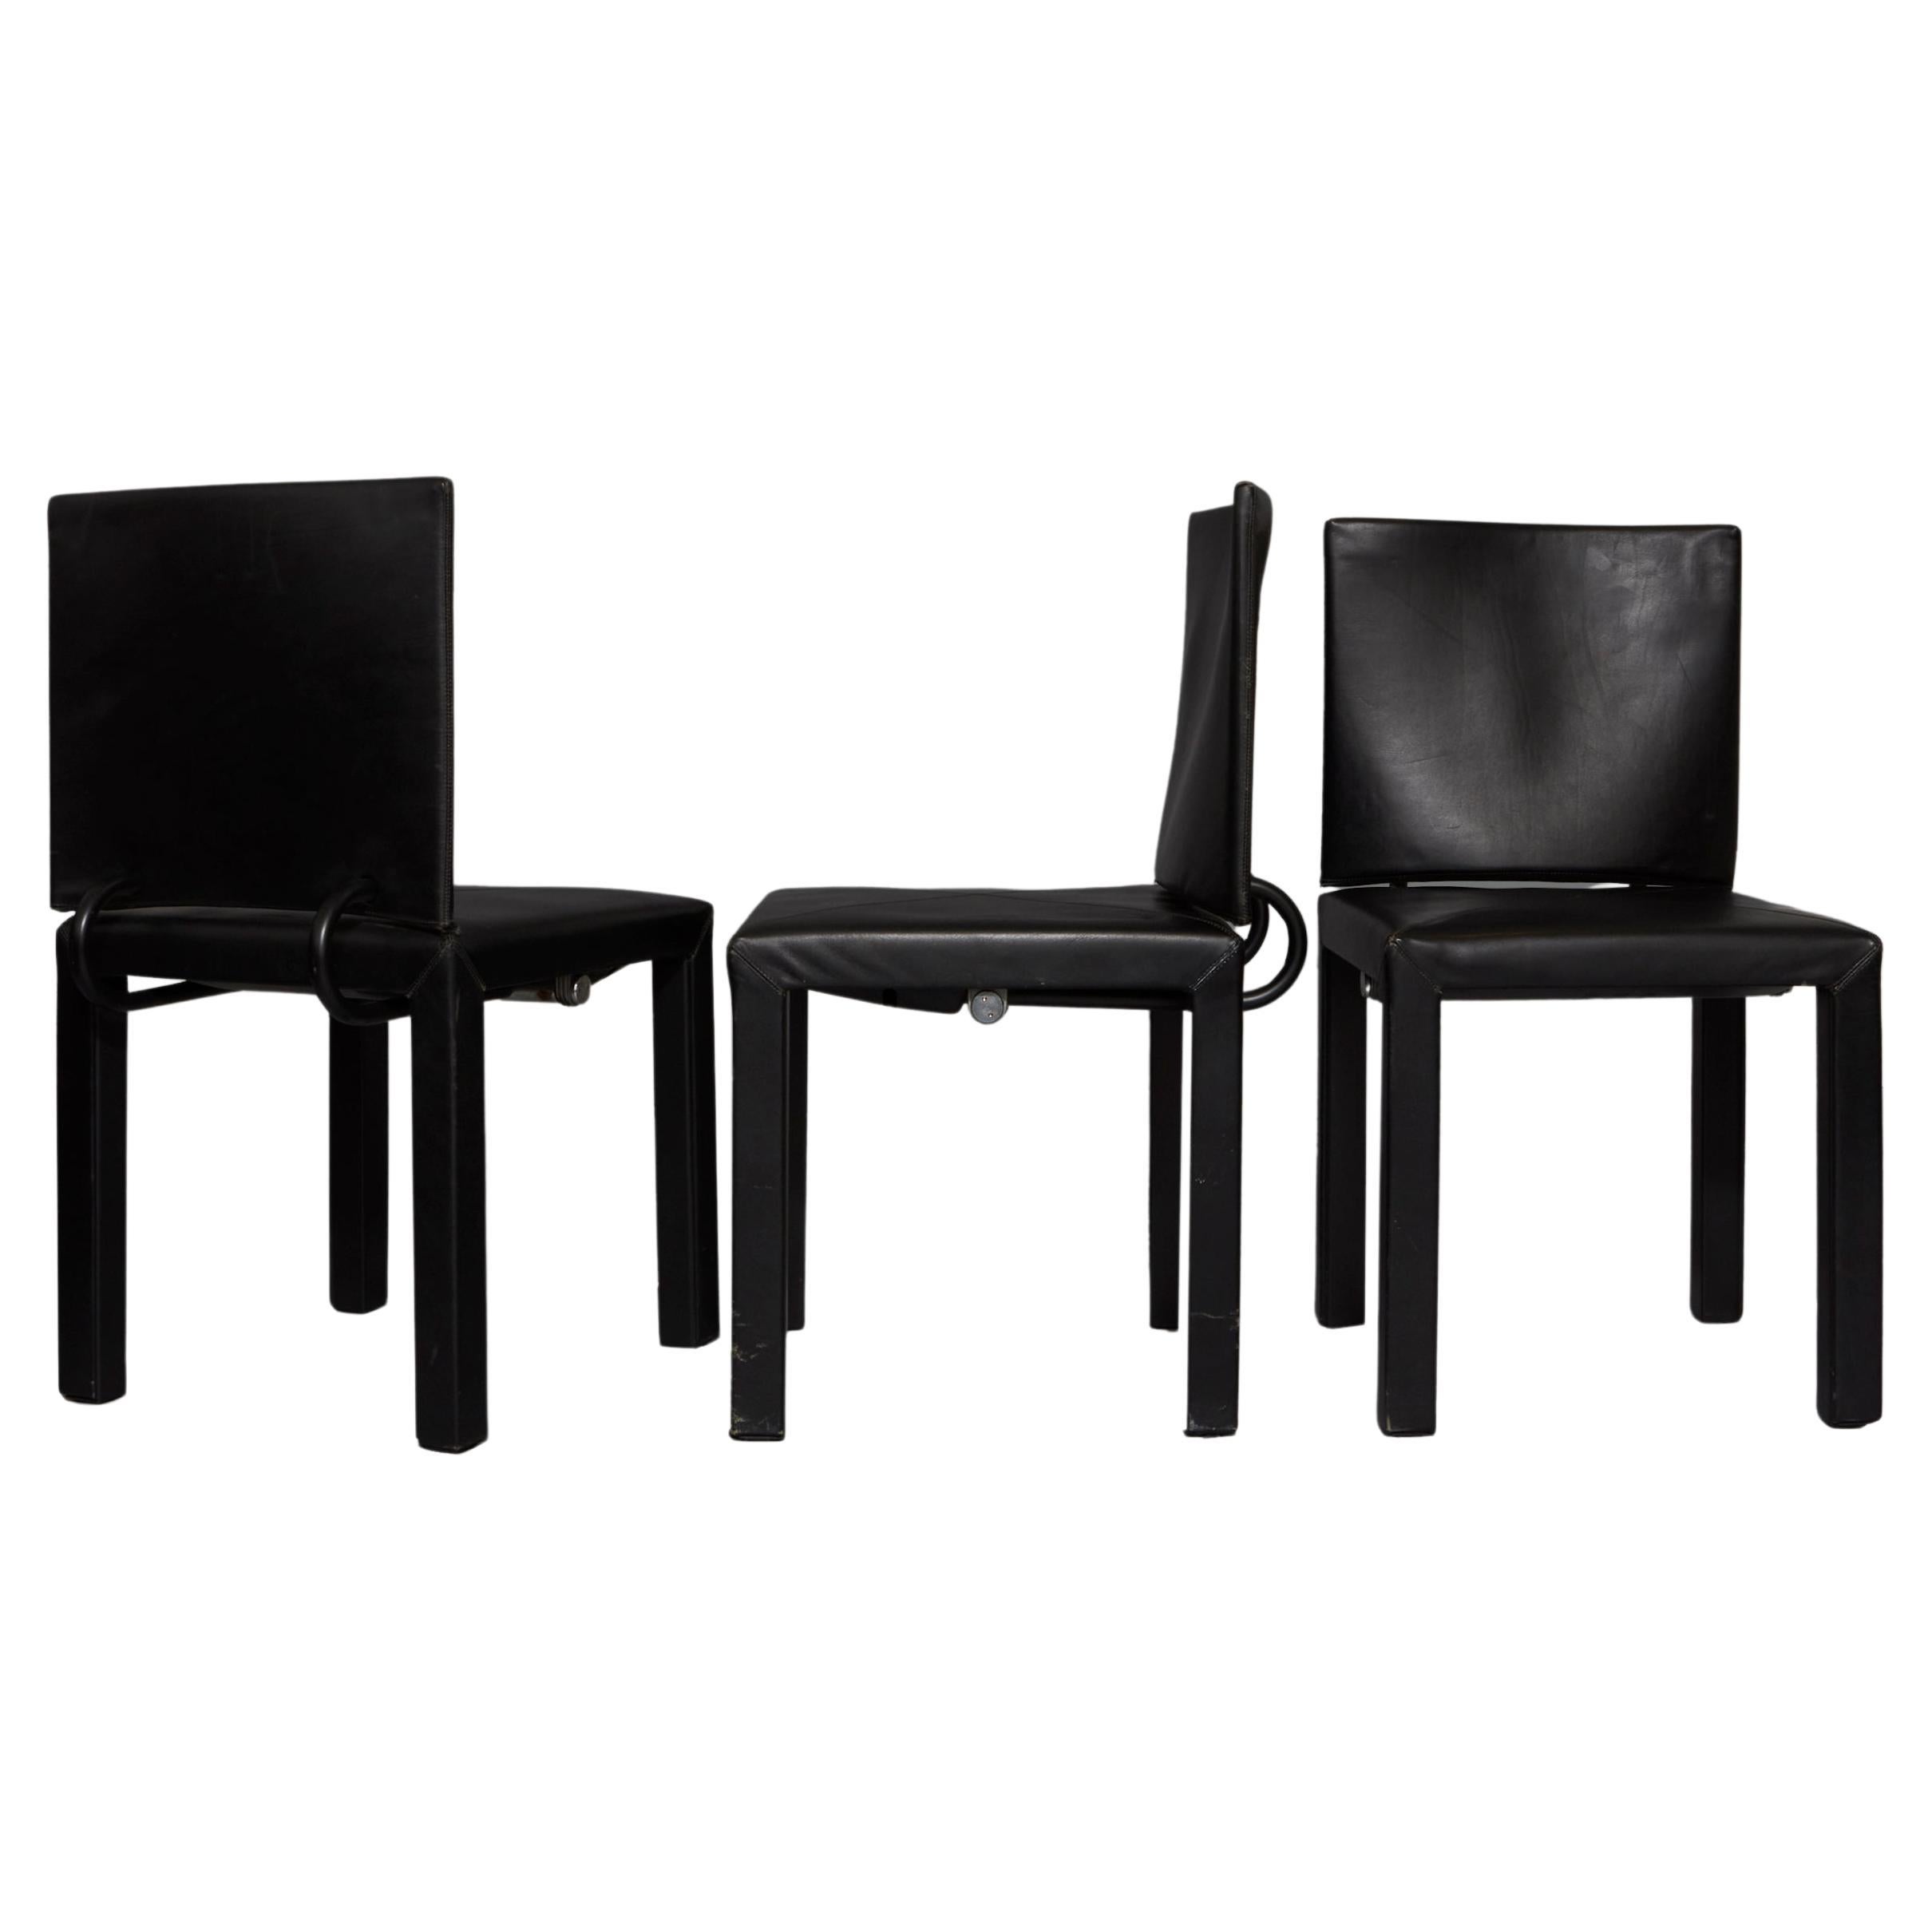 6 1980s Paolo Piva for B&B Italia Chairs in Leather and Steel